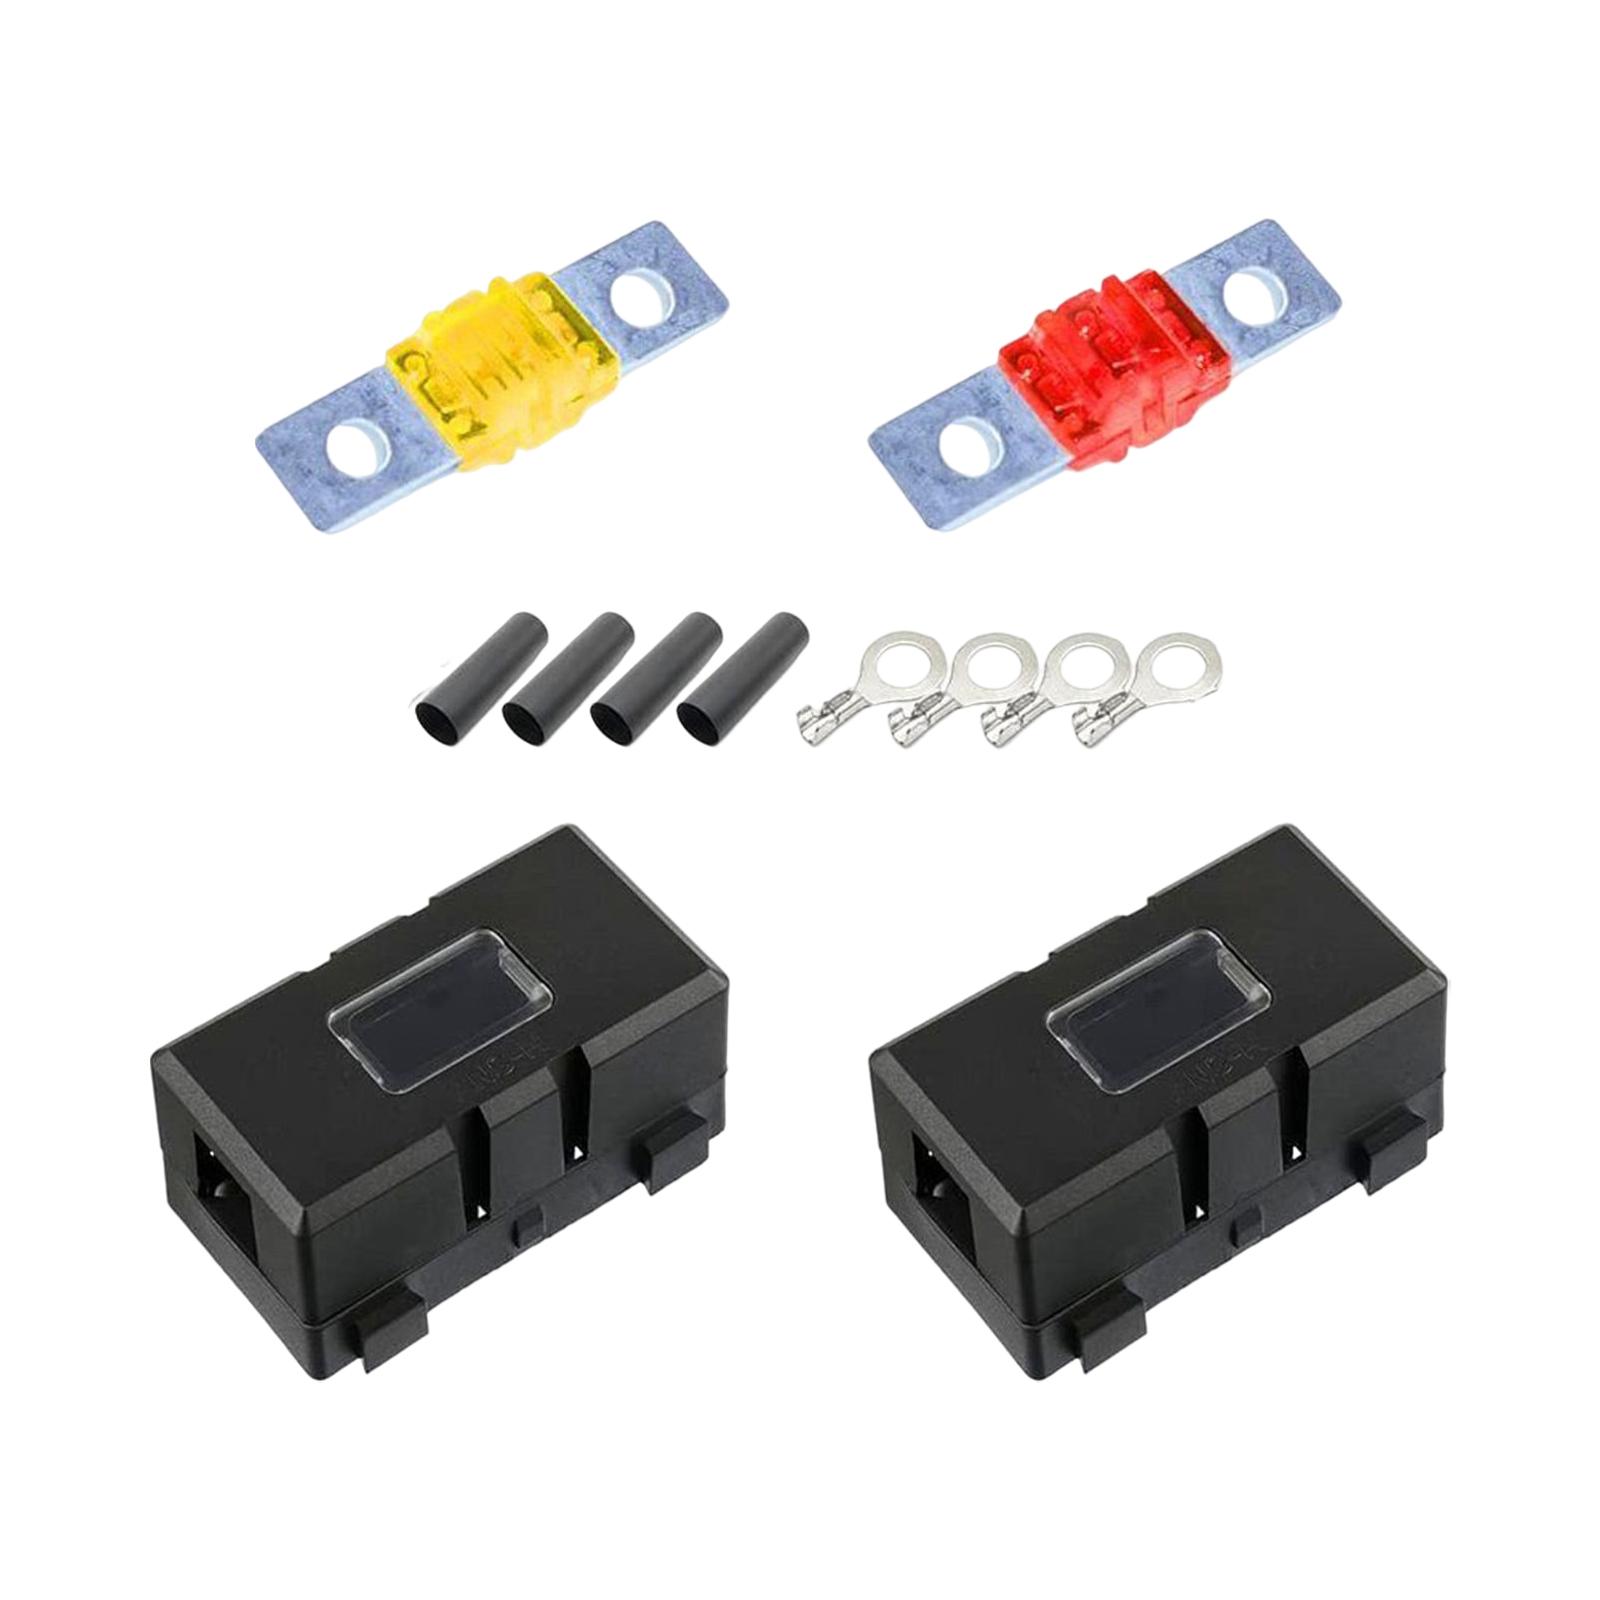 Car ANS Fuse Holder Block Durable Waterproof for Motorcycles Cars 2 Set 50A